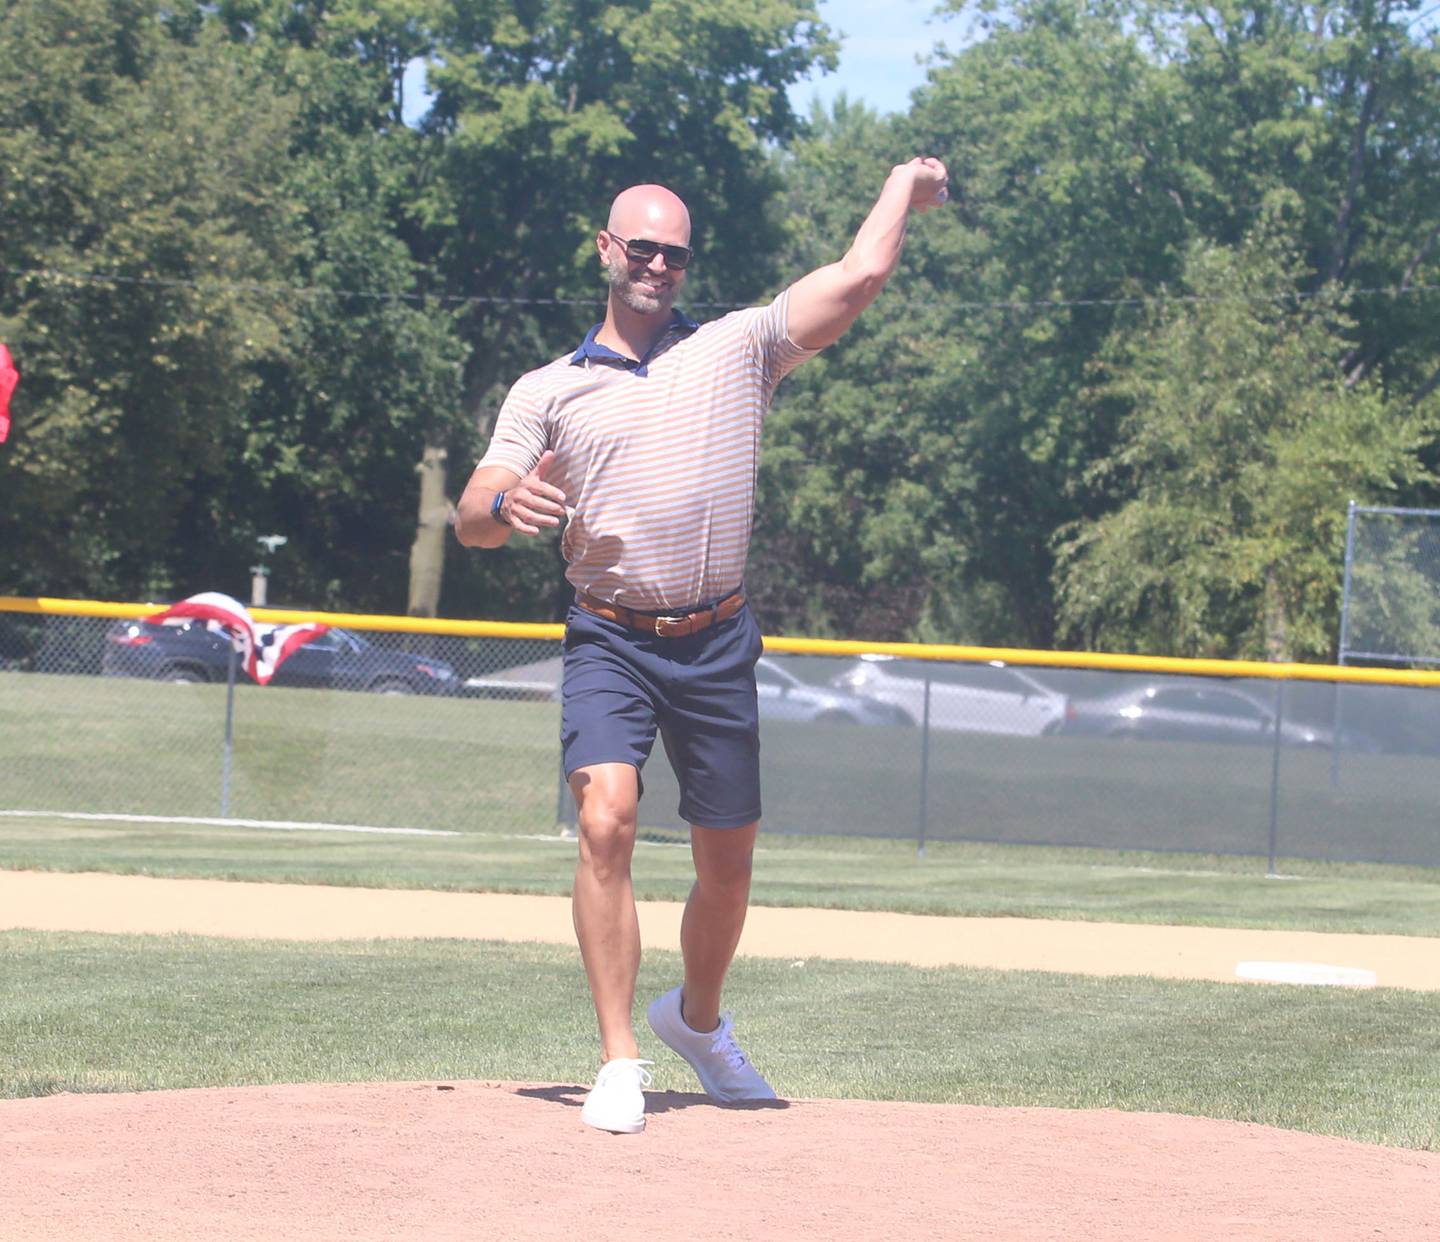 Former Major League Baseball pitcher J.A. Happ throws out the first pitch of the St. Bede alumni game during the J.A. Happ Day and field dedication on Sunday, July 30, 2023 at Washington Park in Peru.